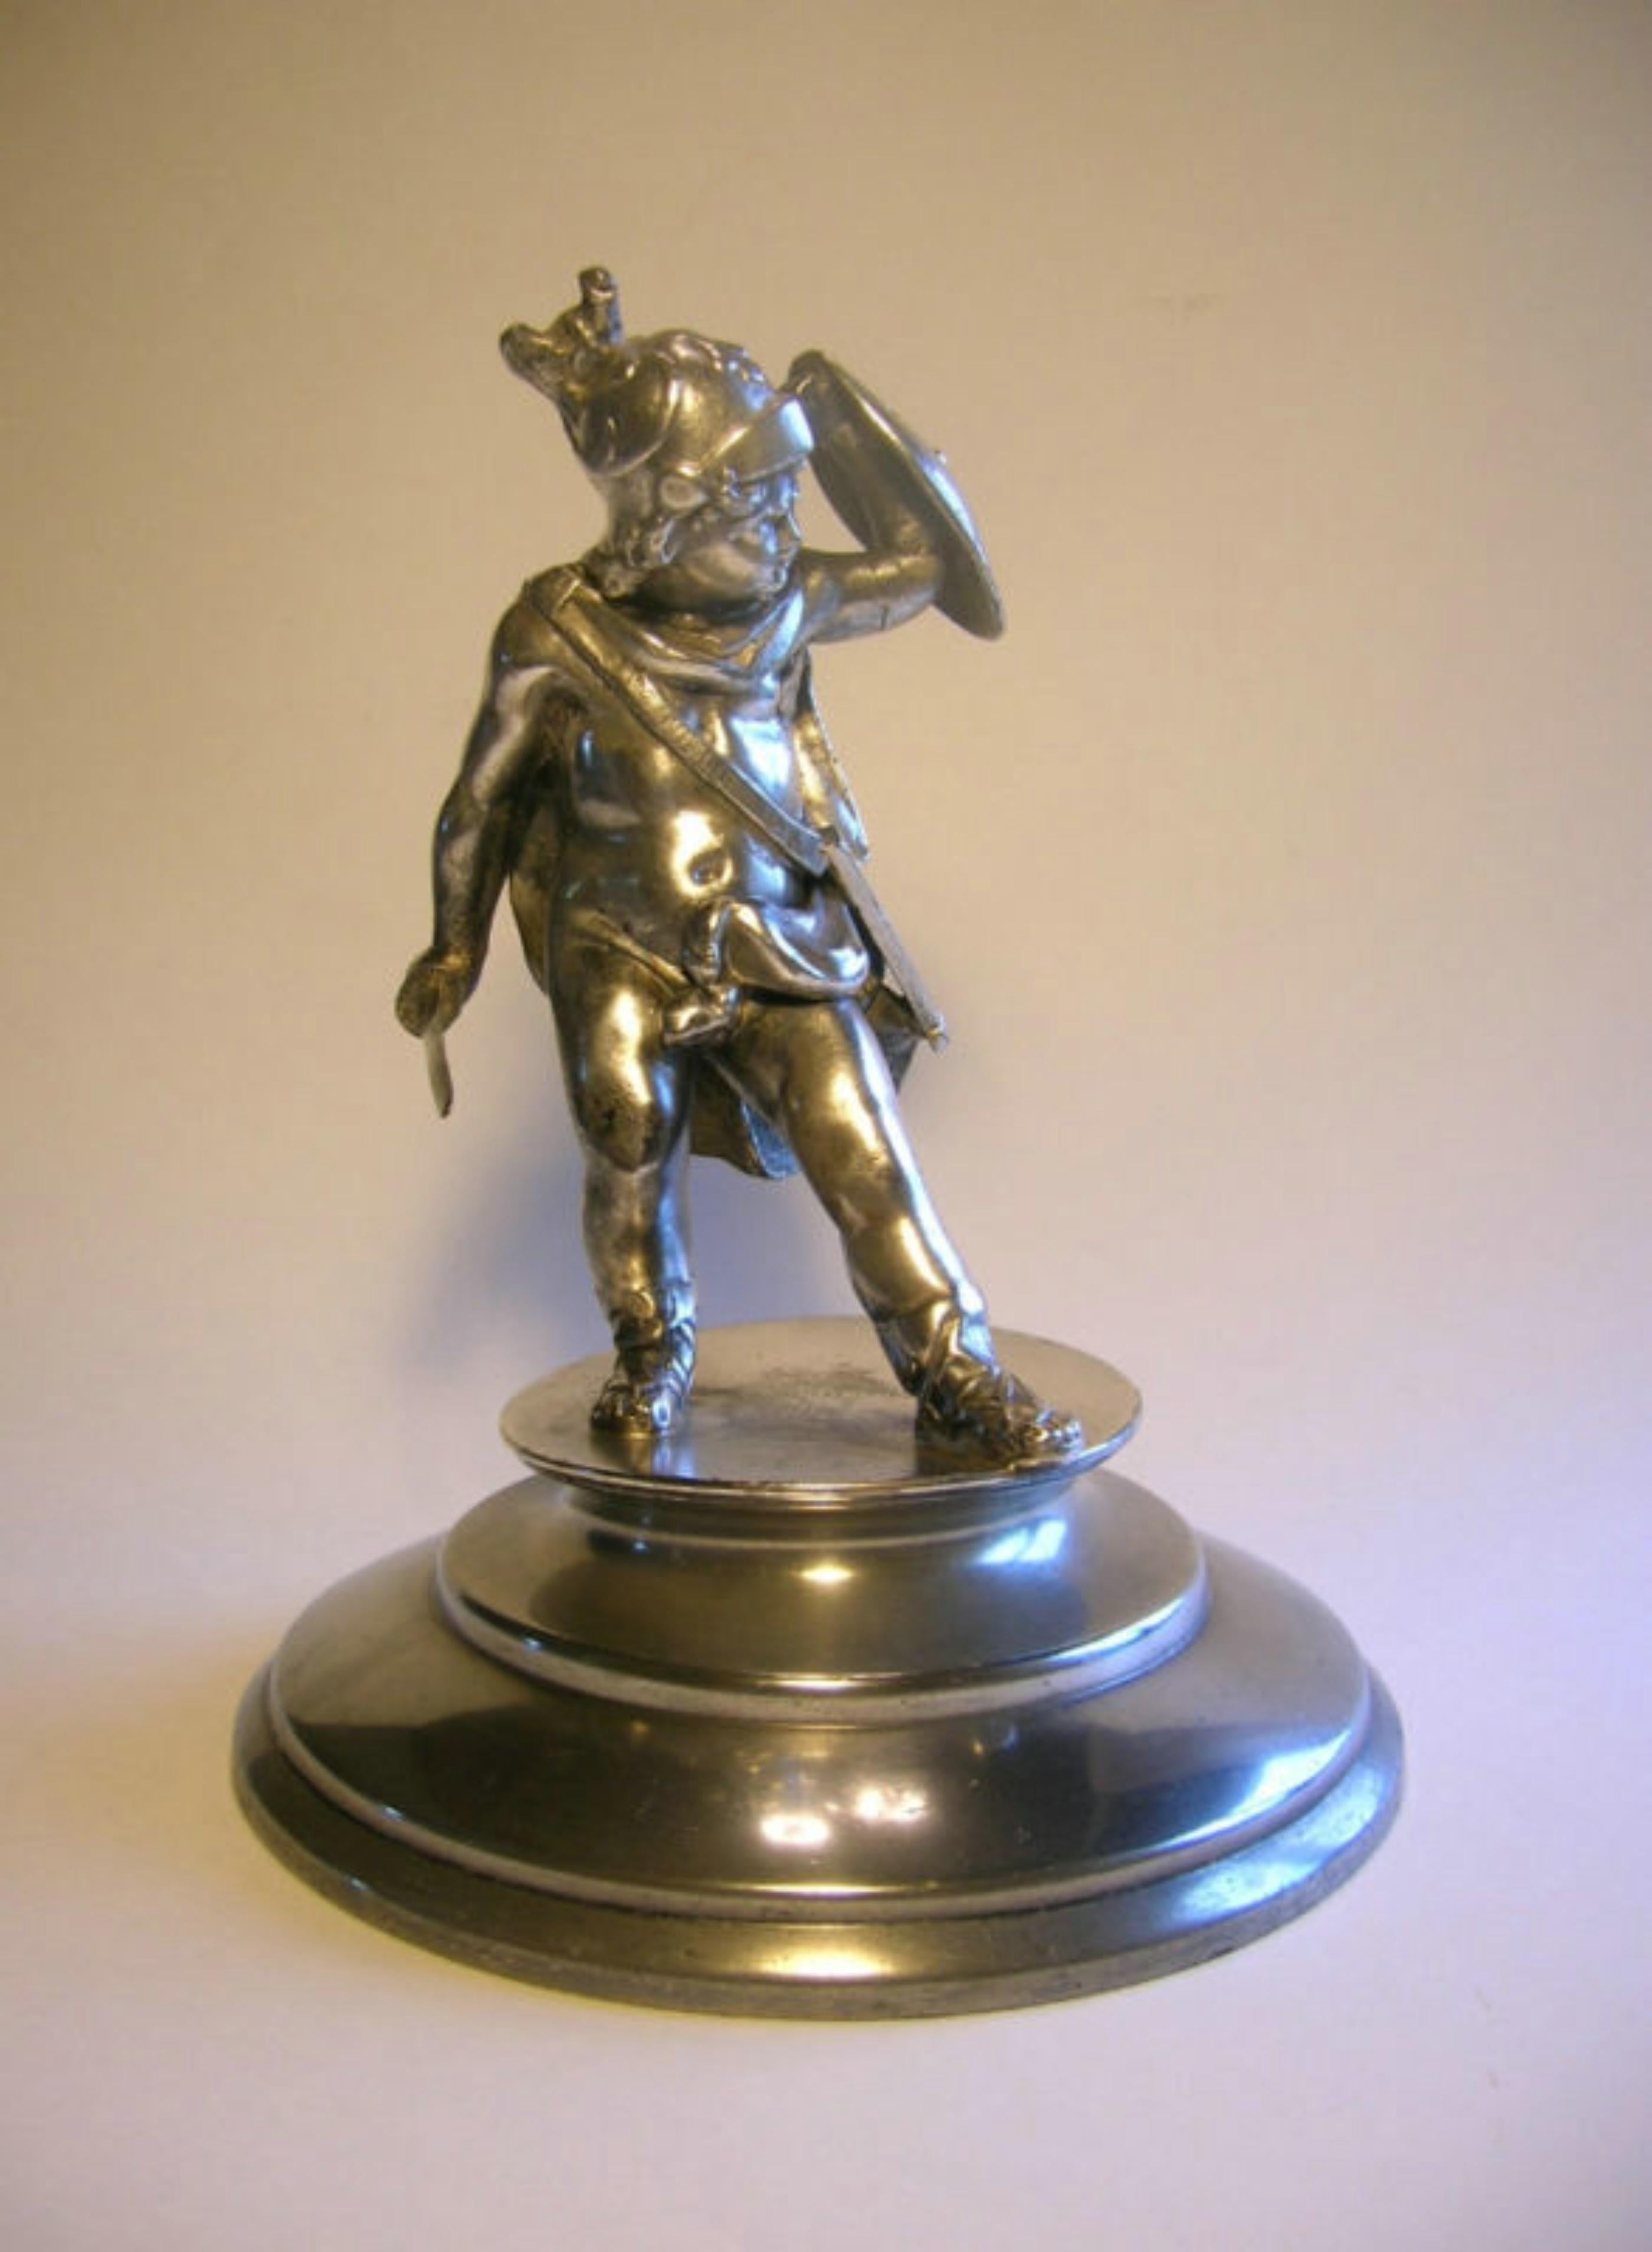 MIDDLETOWN PLATE COMPANY (1864-1899) - Antique fine casting and quadruple silver-plate statue on a stepped plinth base - signed - United States (Middletown CT) - late 19th century.

Fair antique condition - tarnishing - minor surface scratches and